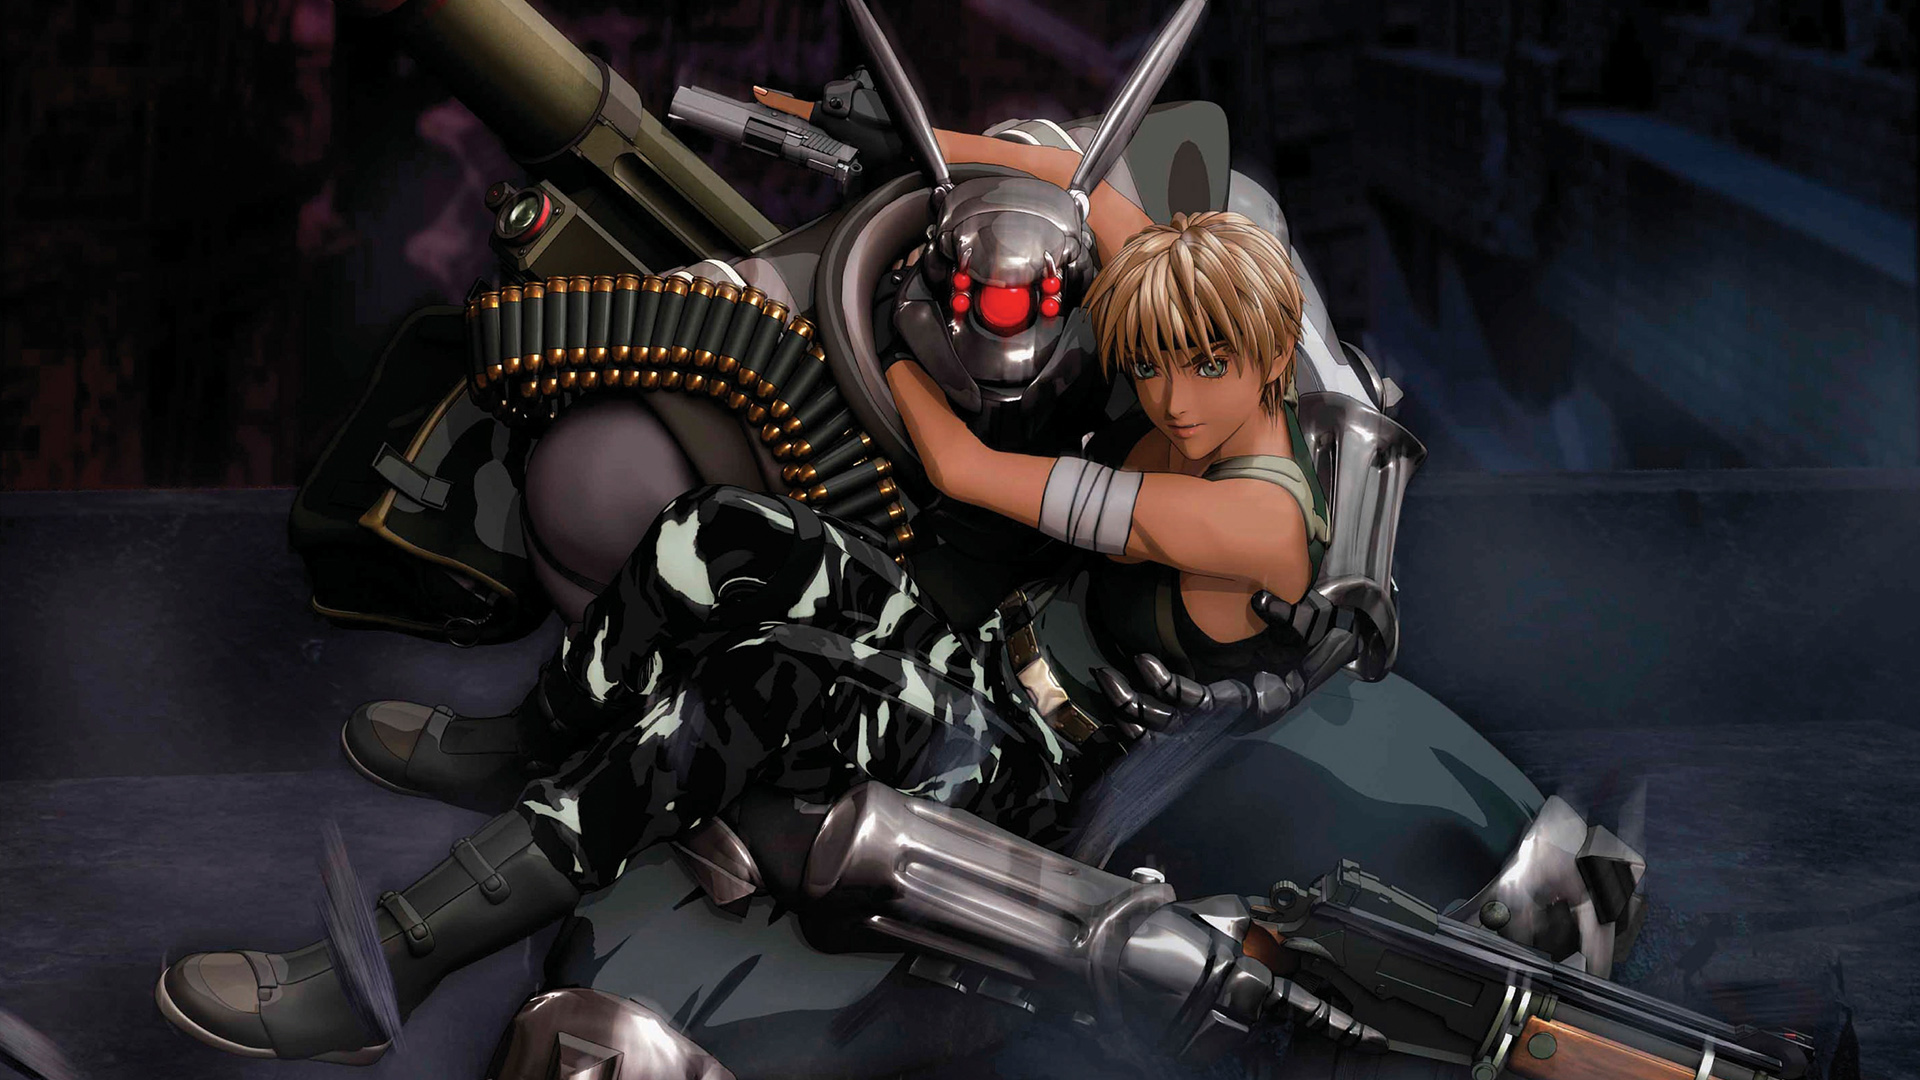 Anime Appleseed HD Wallpaper | Background Image